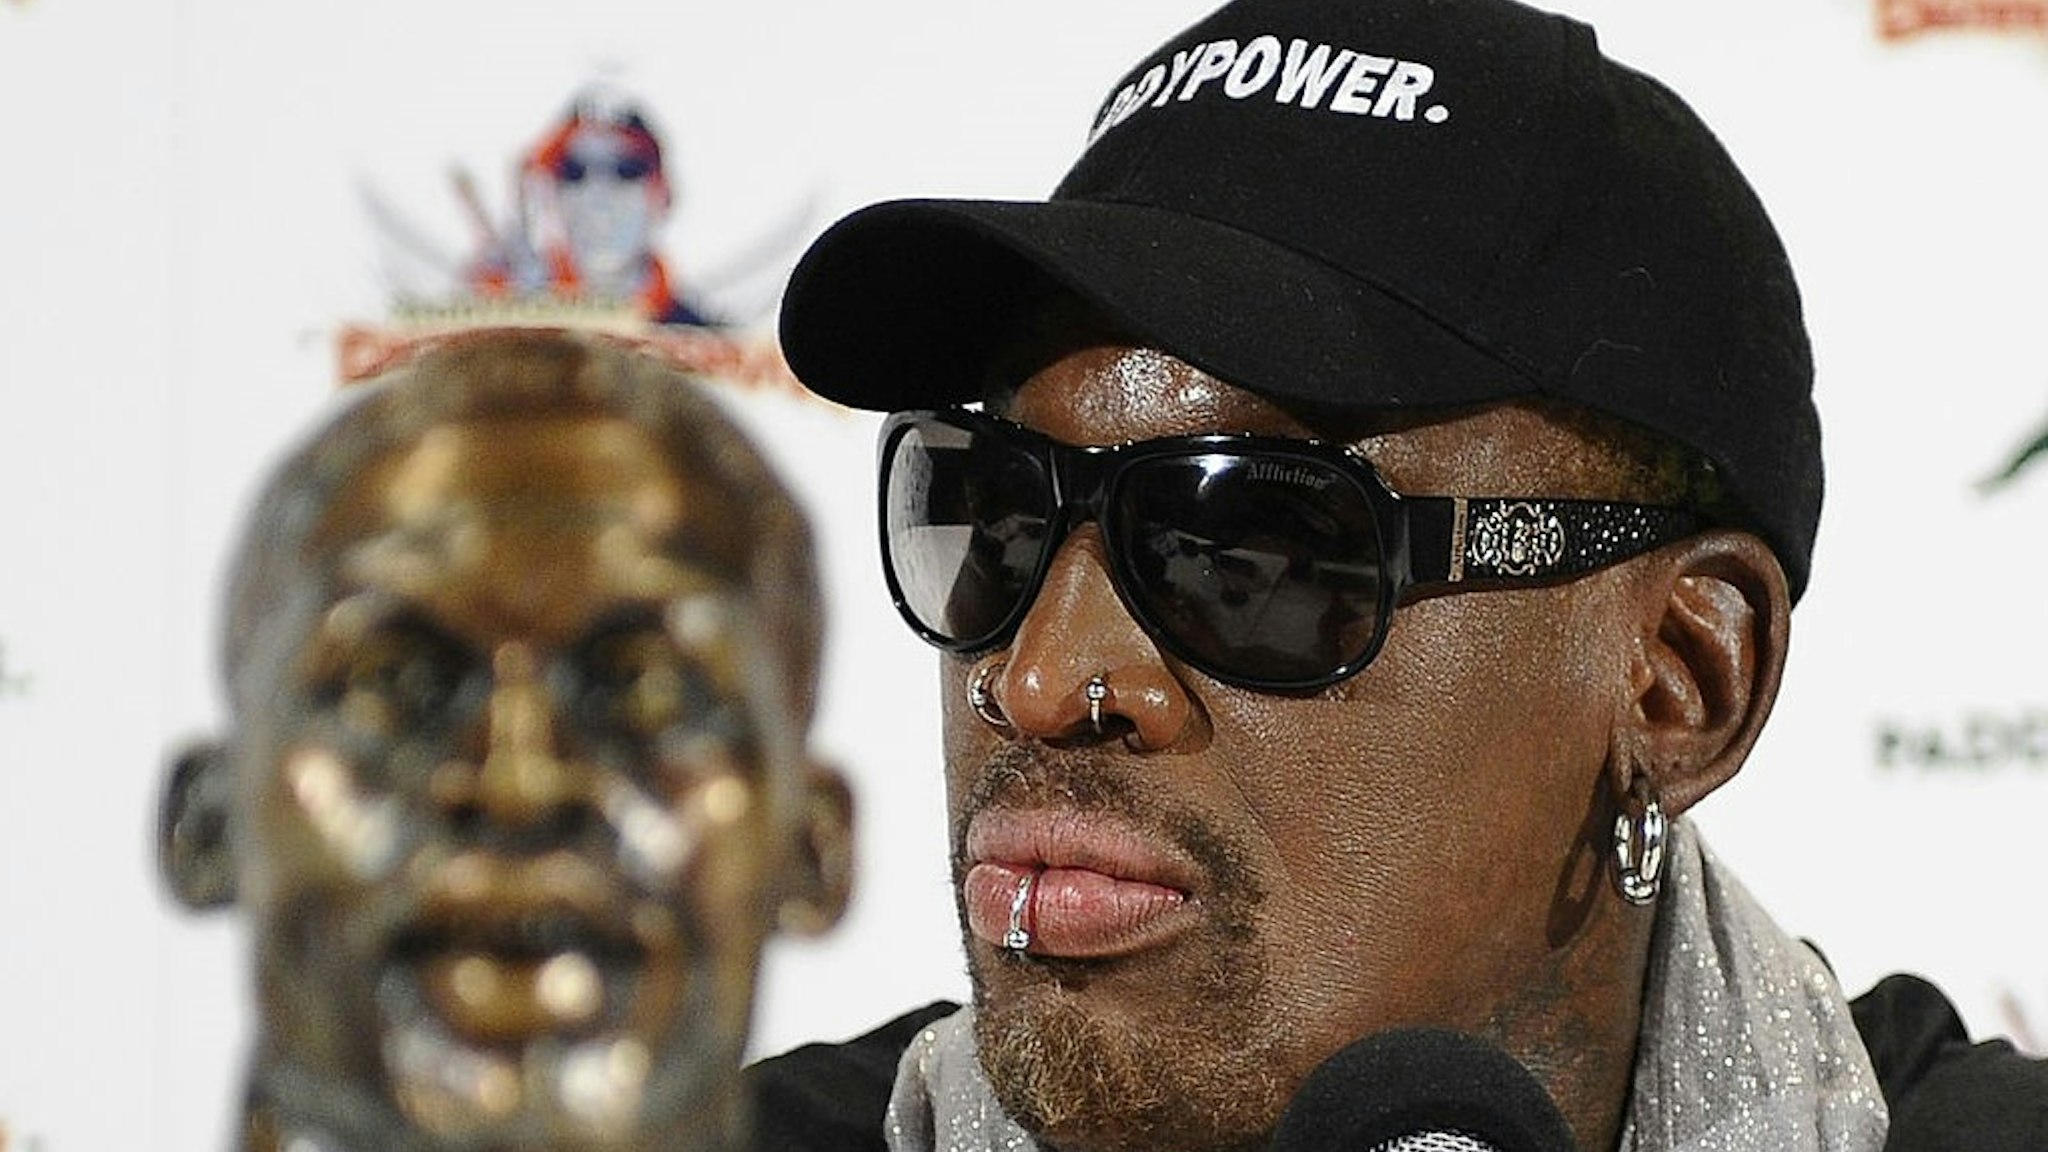 Former-NBA player Dennis Rodman holds a news conference in New York on September 9, 2013 to discuss his recent trip to North Korea. Rodman said that he will put together a "basketball diplomacy" event involving players from North Korea. The event will be sponsored by the Irish online betting company Paddy Power. At the news conference, he called Kim Jong Un, ruler of the repressive state, a "very good guy." AFP PHOTO / TIMOTHY CLARY (Photo credit should read